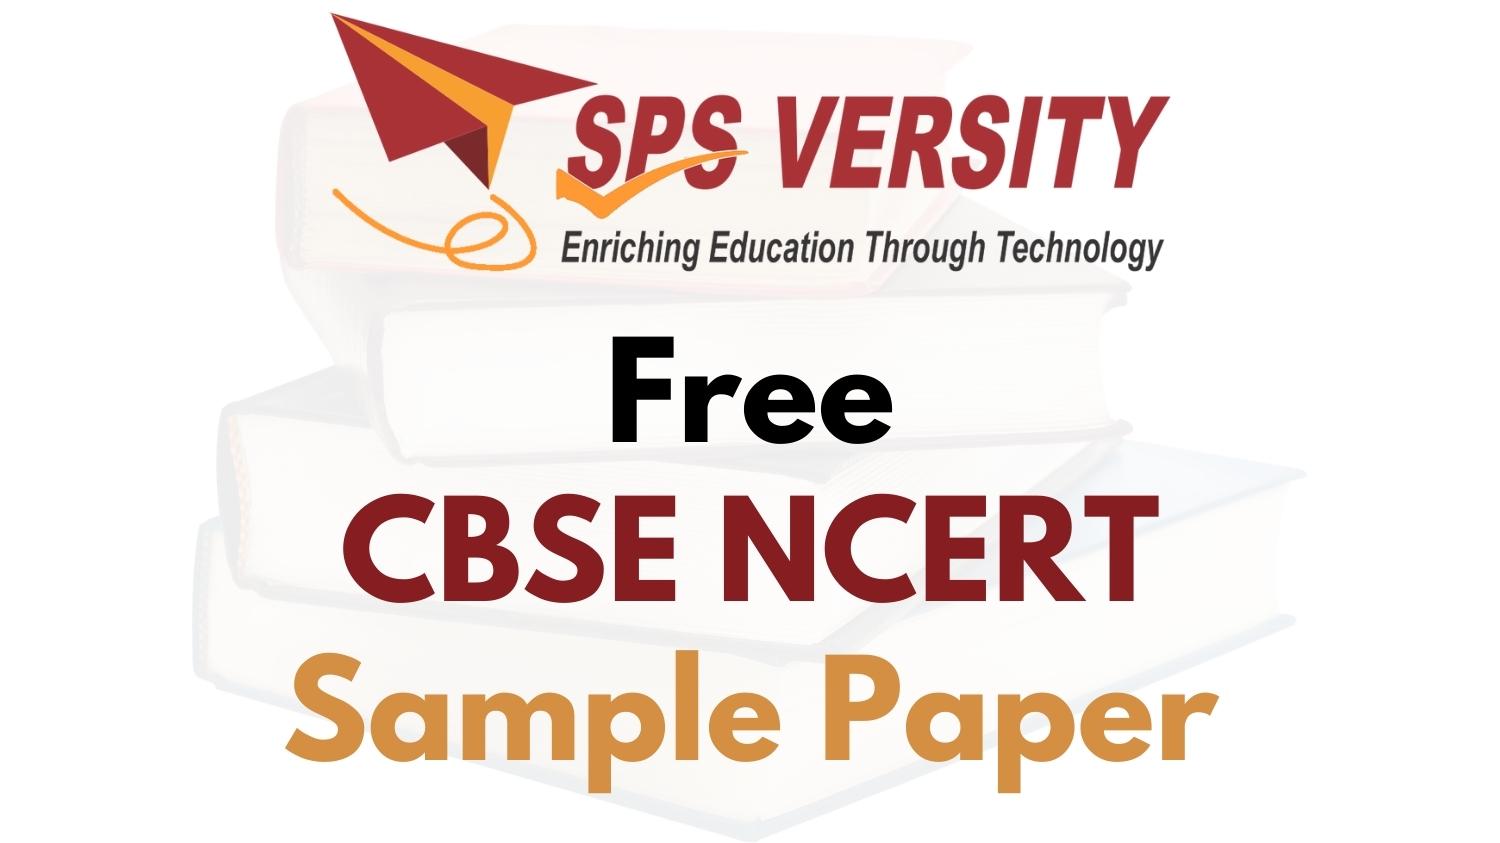 Free CBSE NCERT Sample Papers